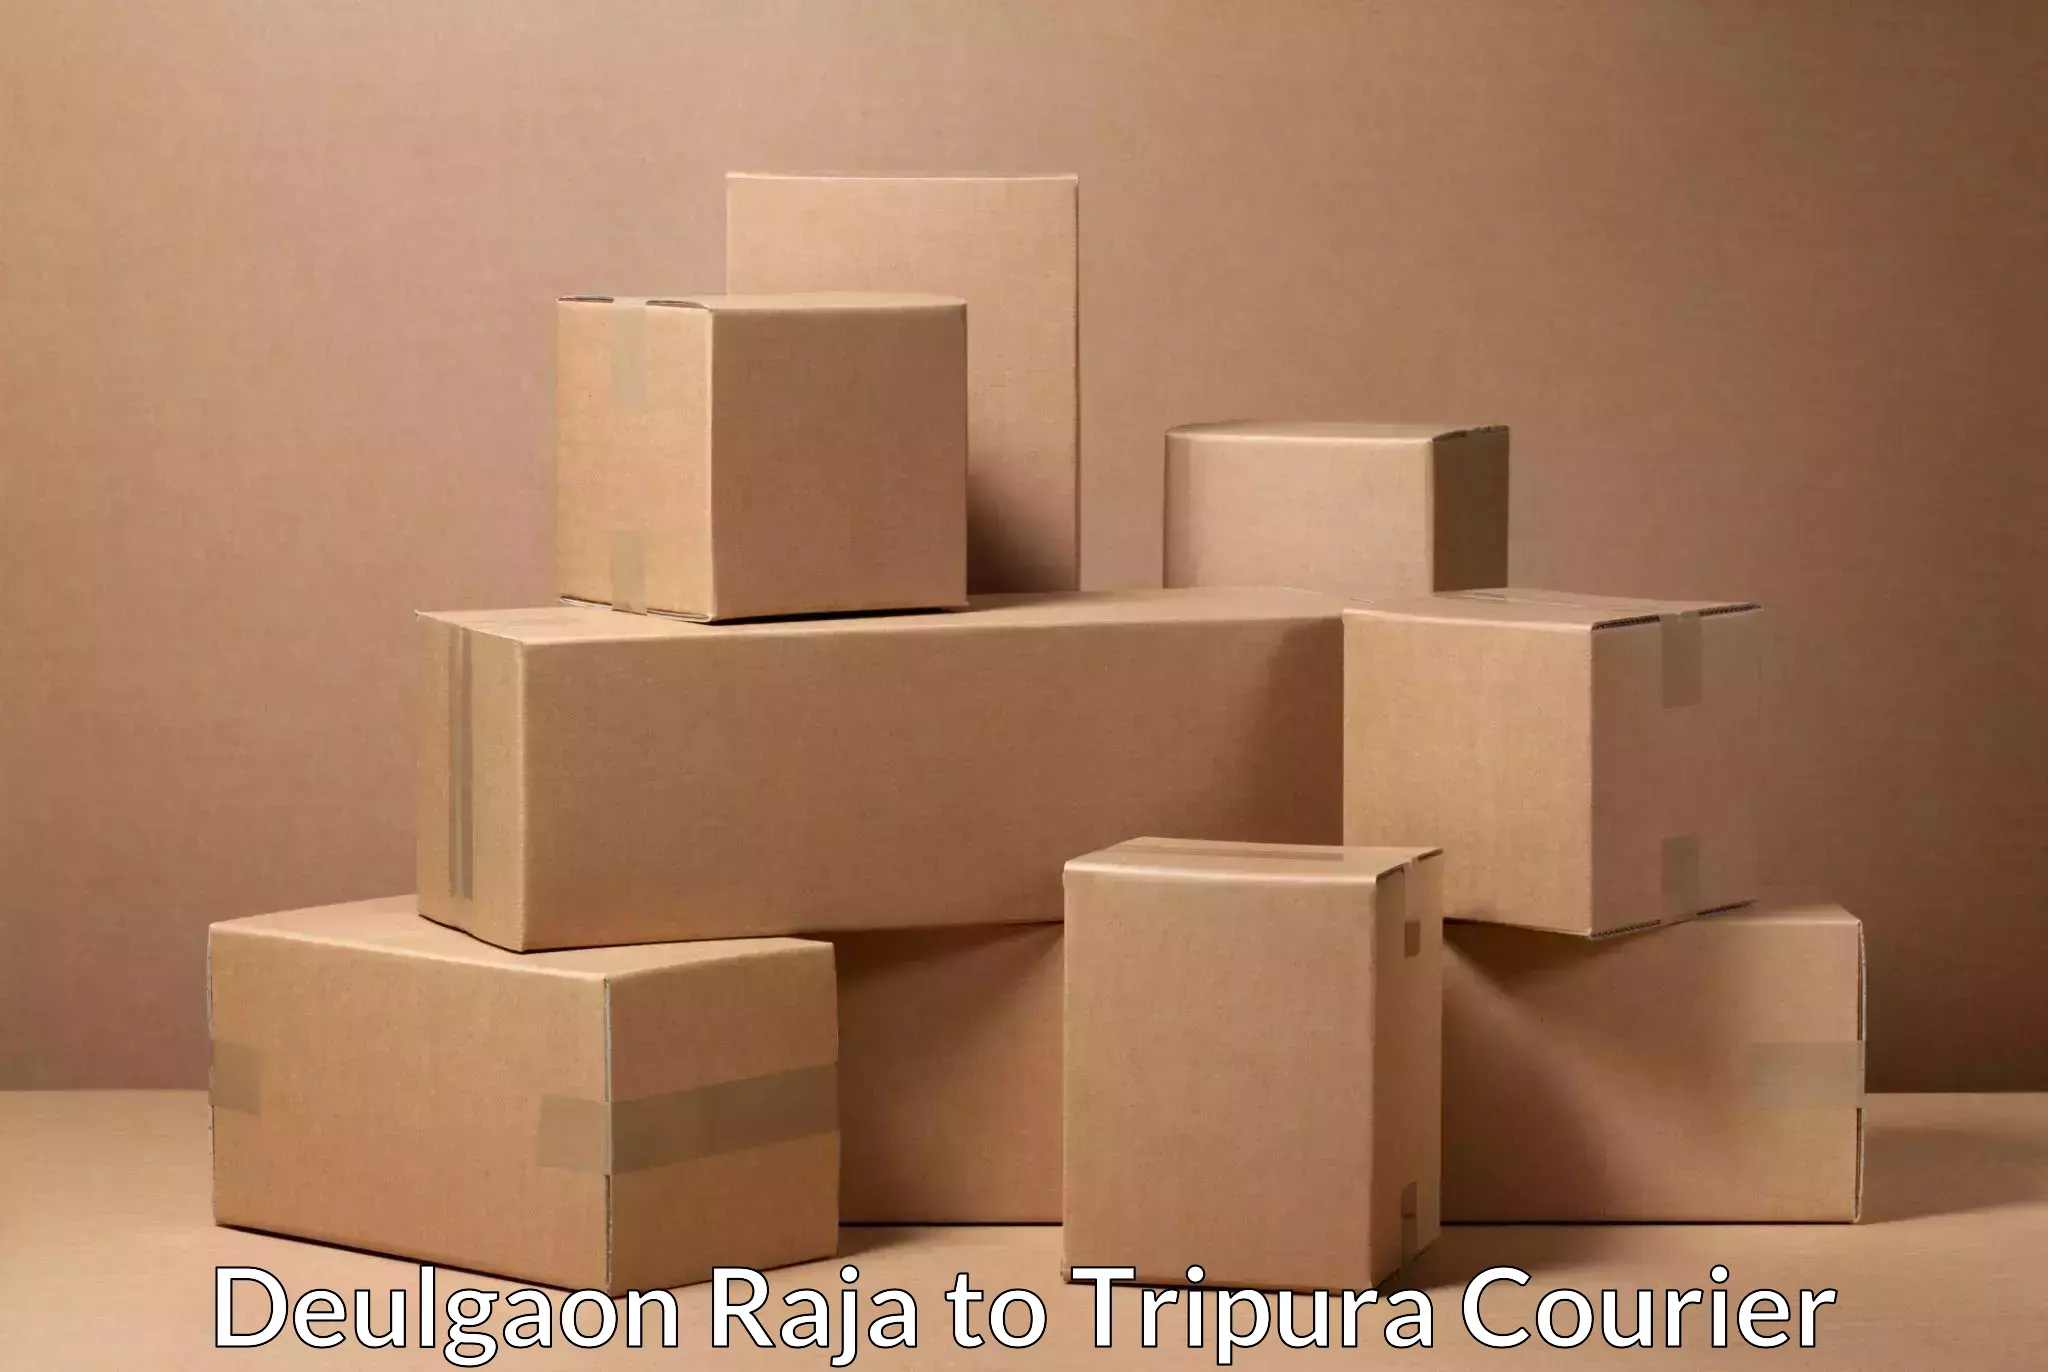 Personal courier services in Deulgaon Raja to Tripura